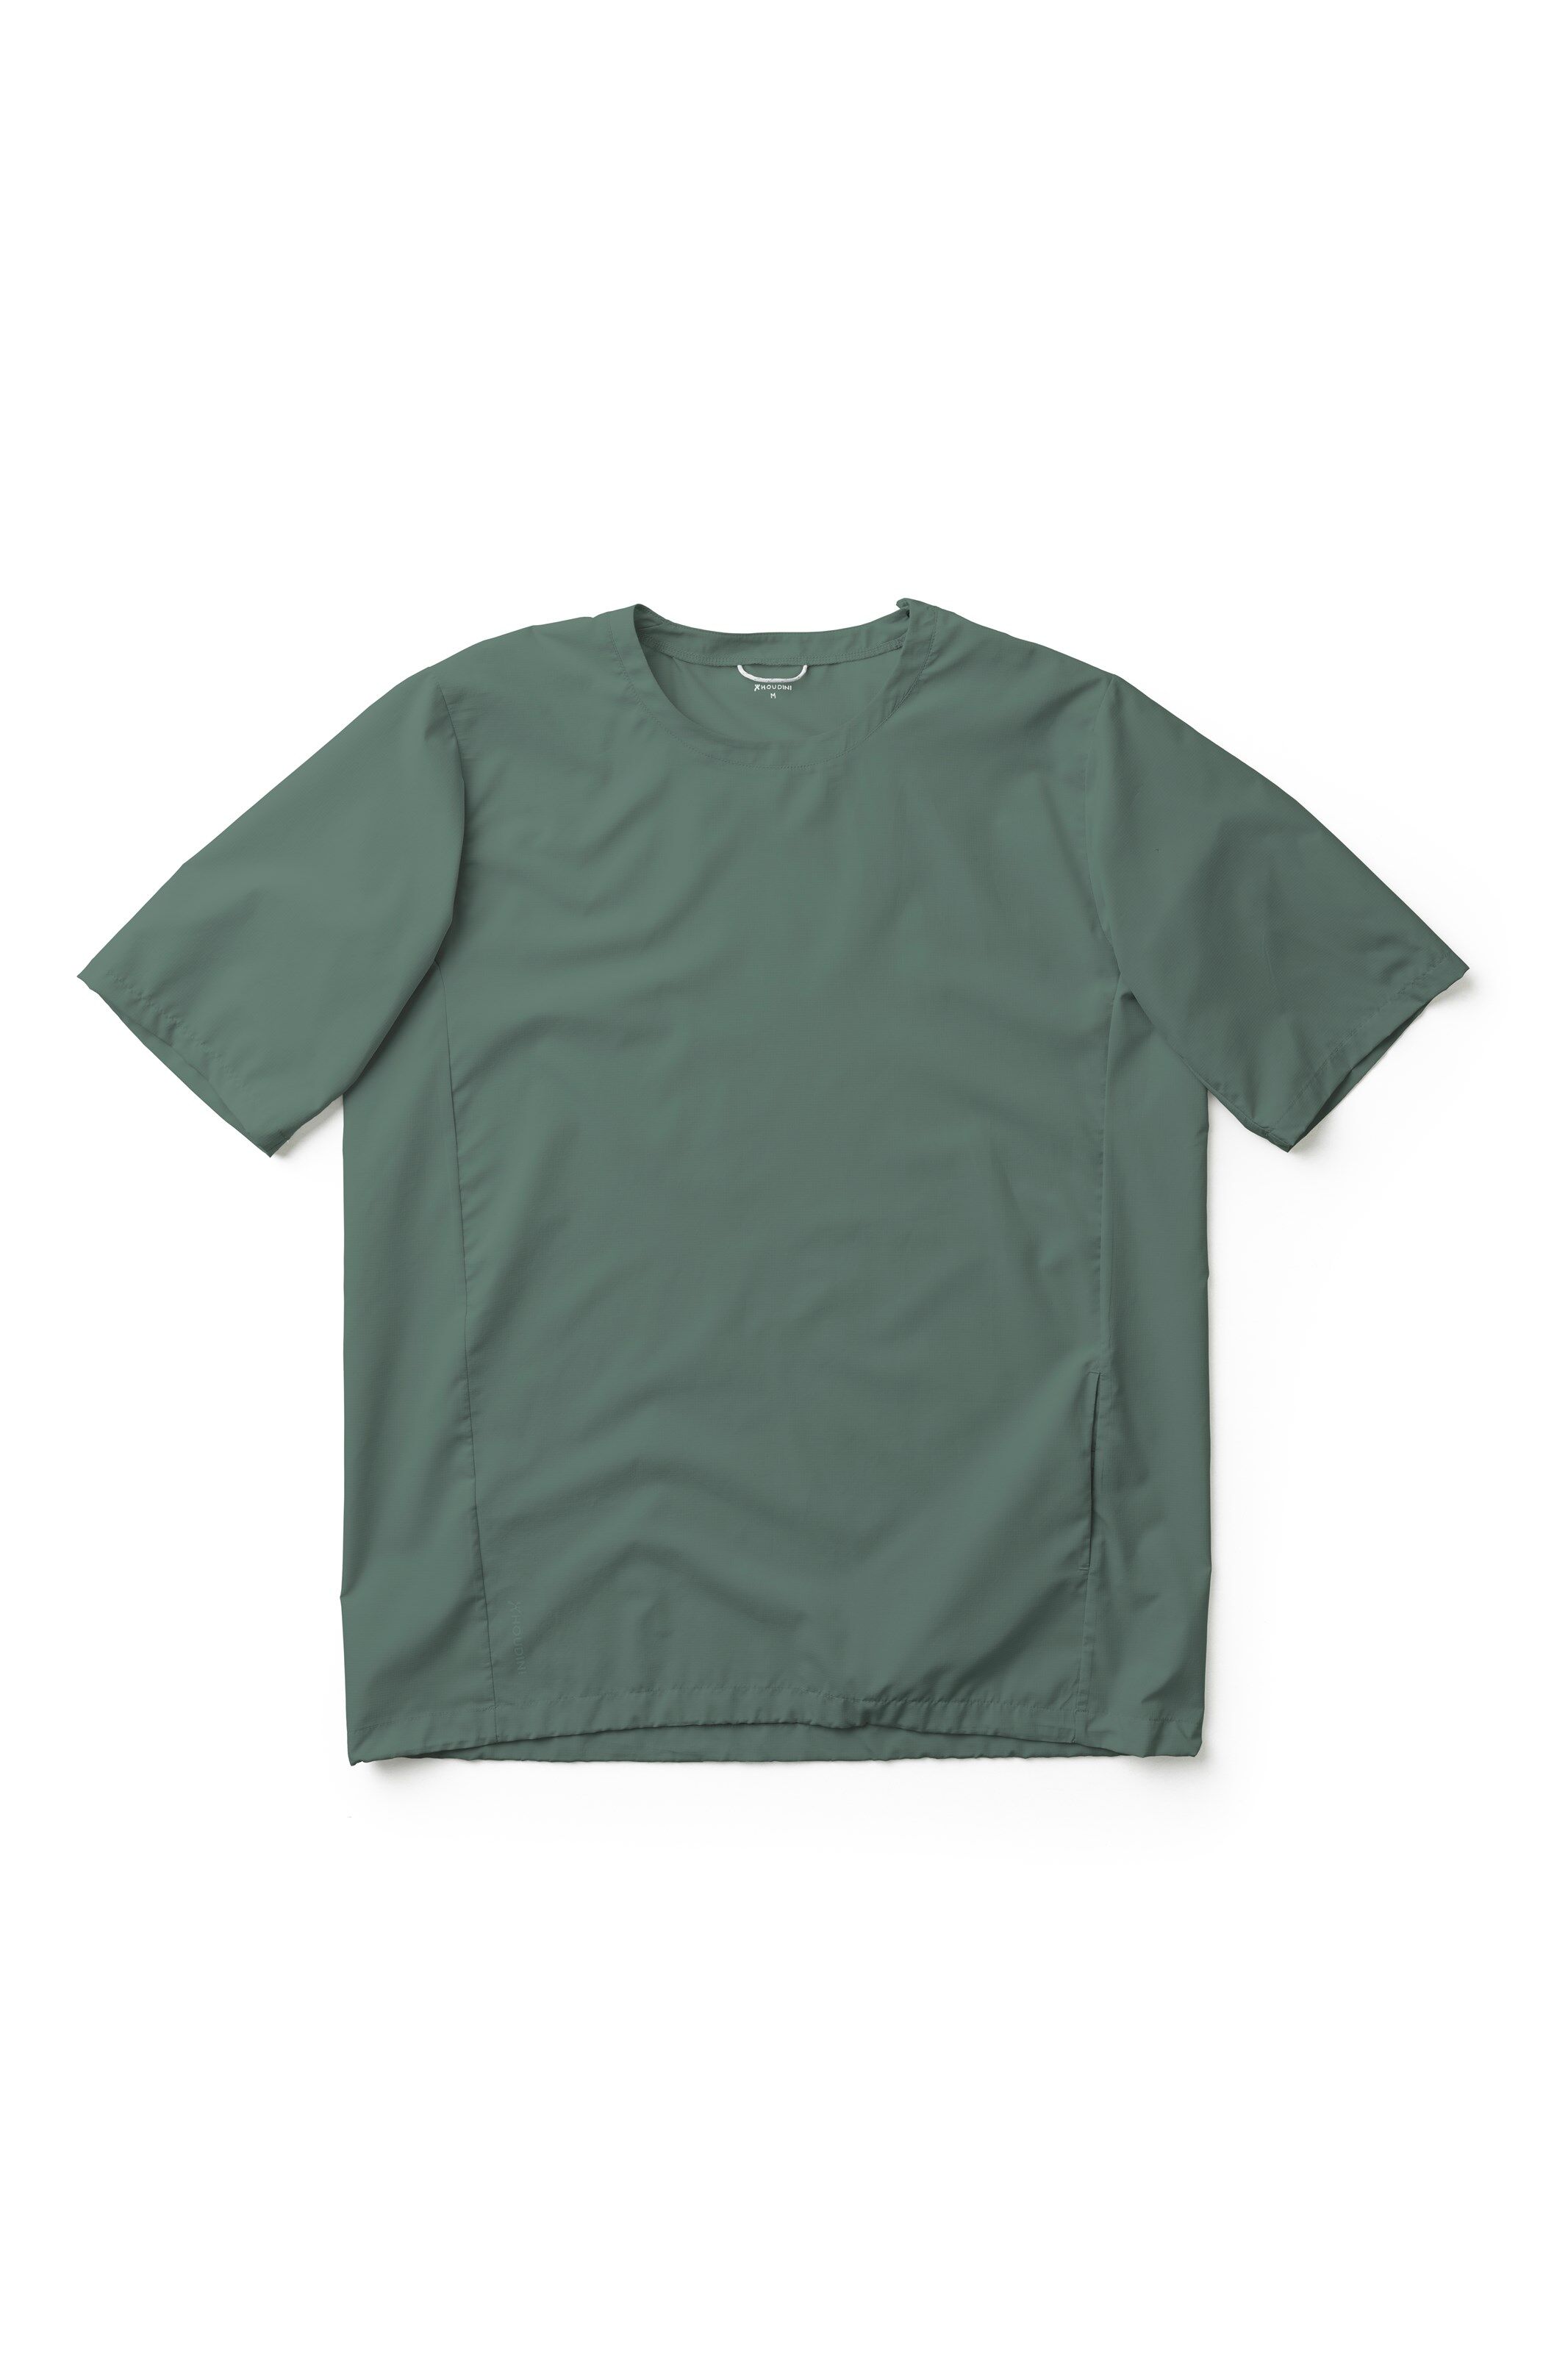 Houdini Weather Tee Storm Green 159784 Ms S / Ws M 2019